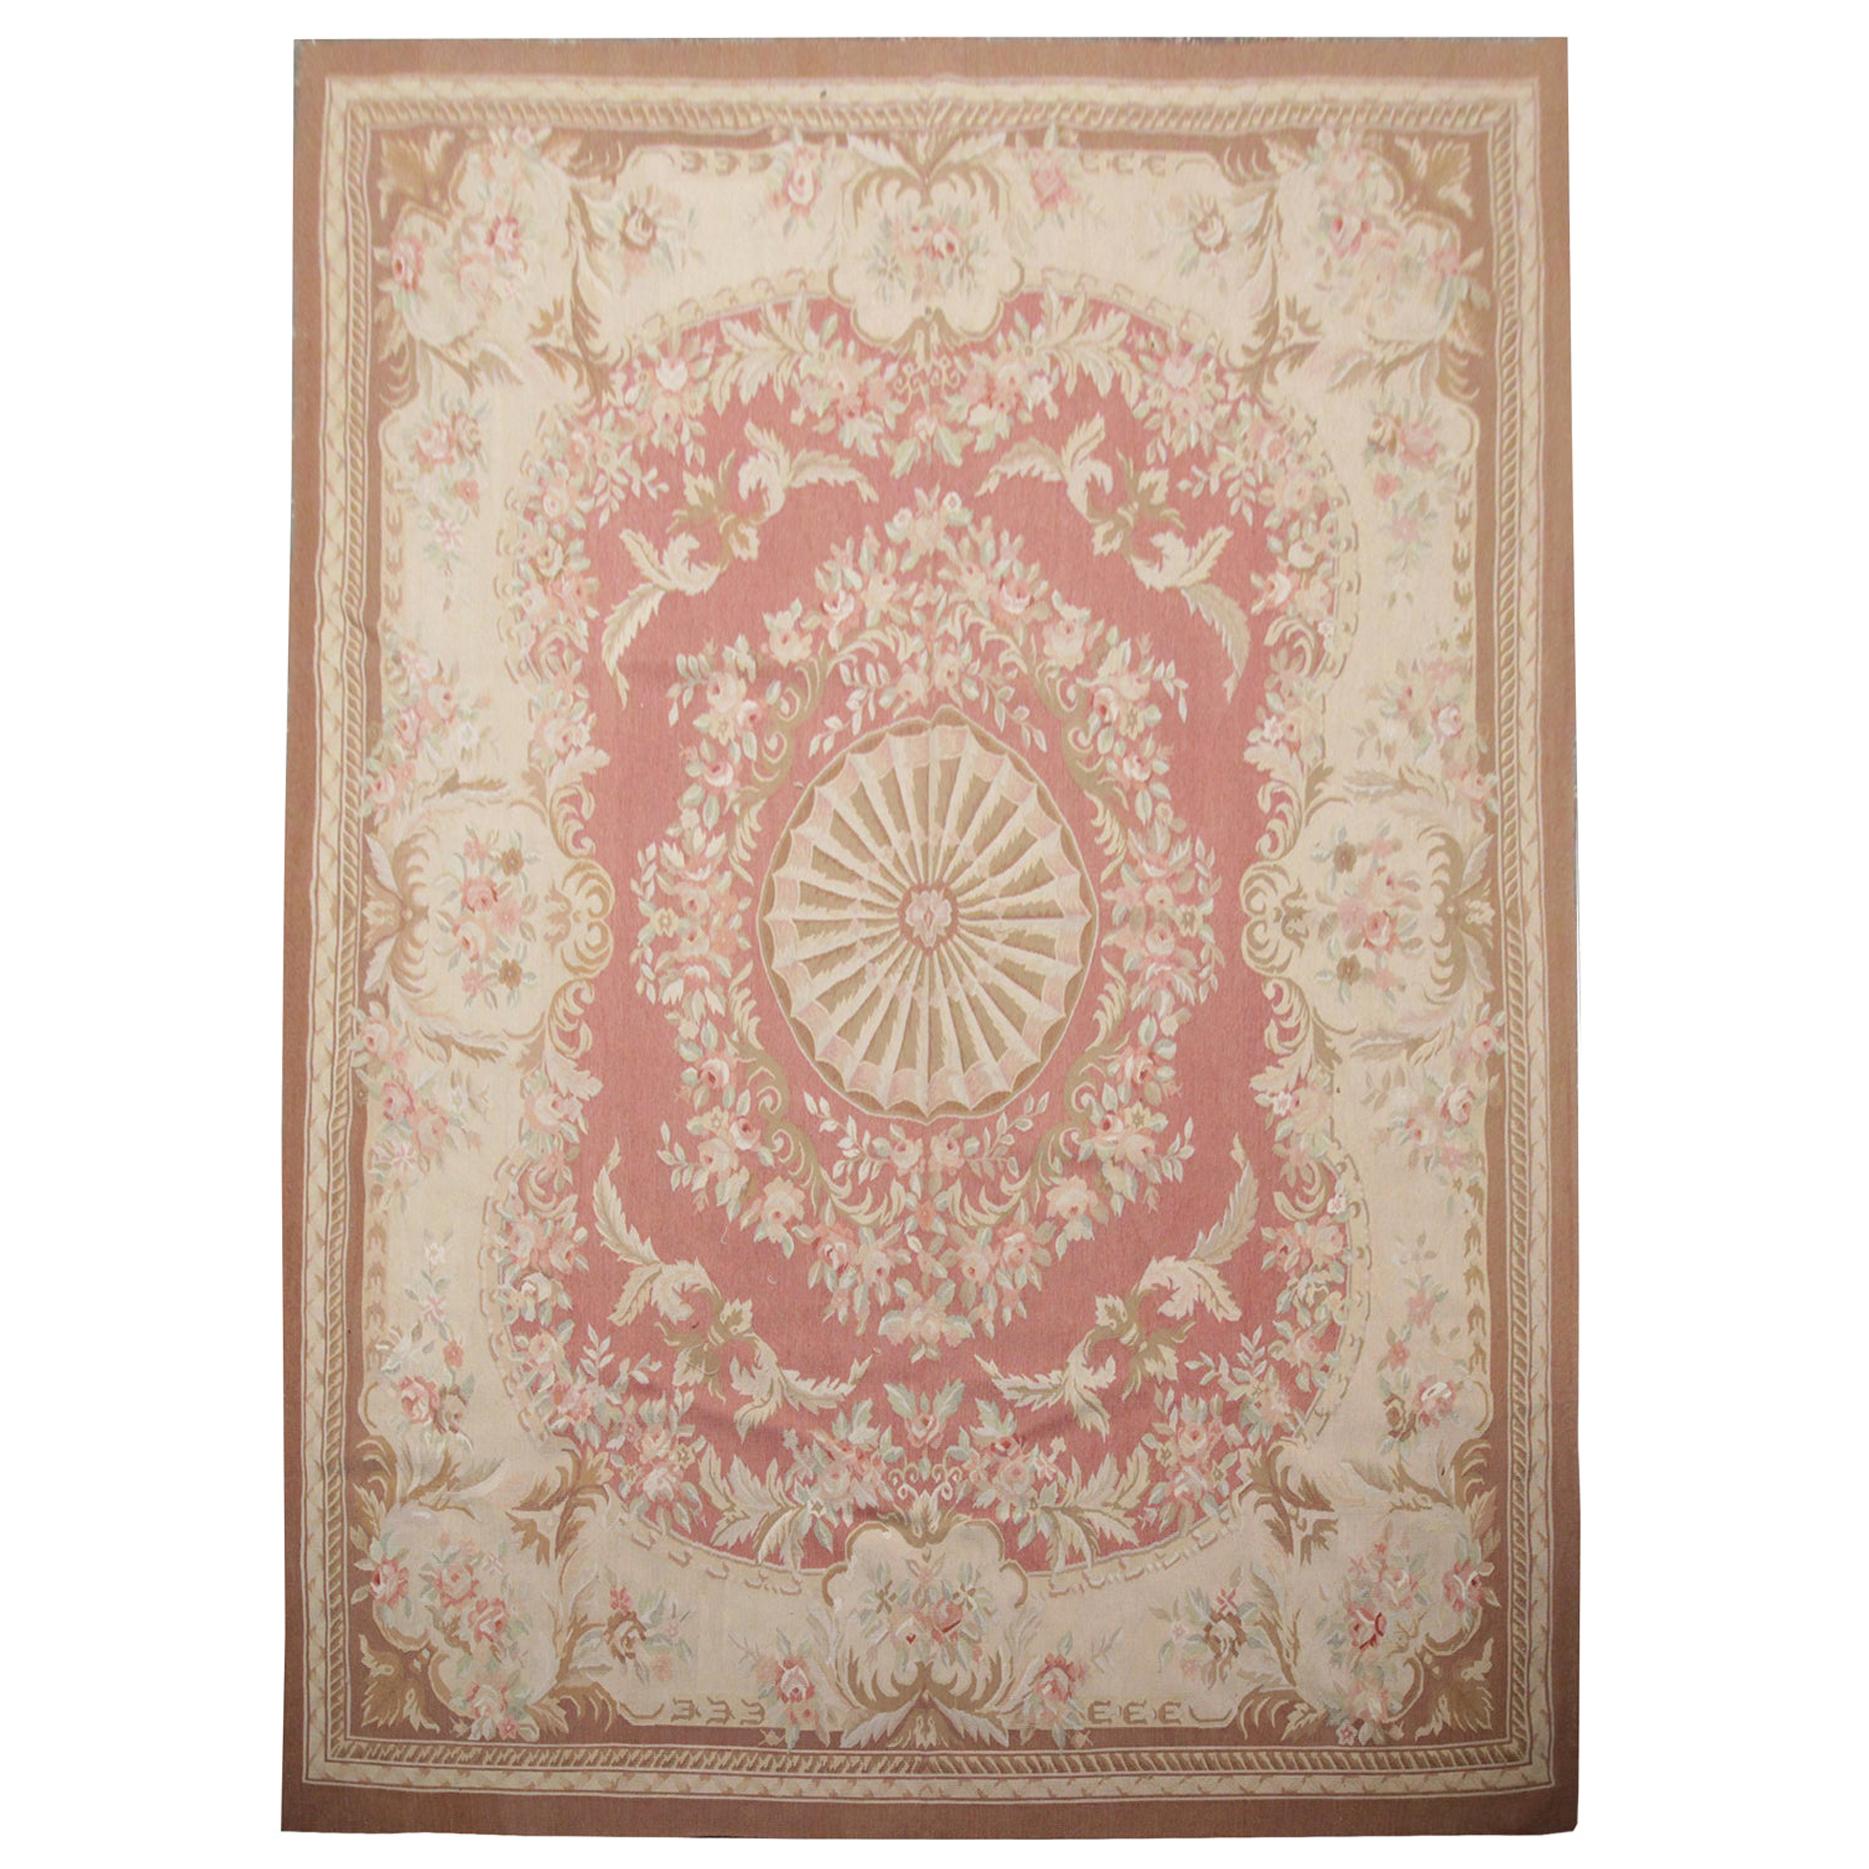 Handmade Carpet Vintage Aubusson Style Rug 1980 French- Pink and Beige Wool Rugs